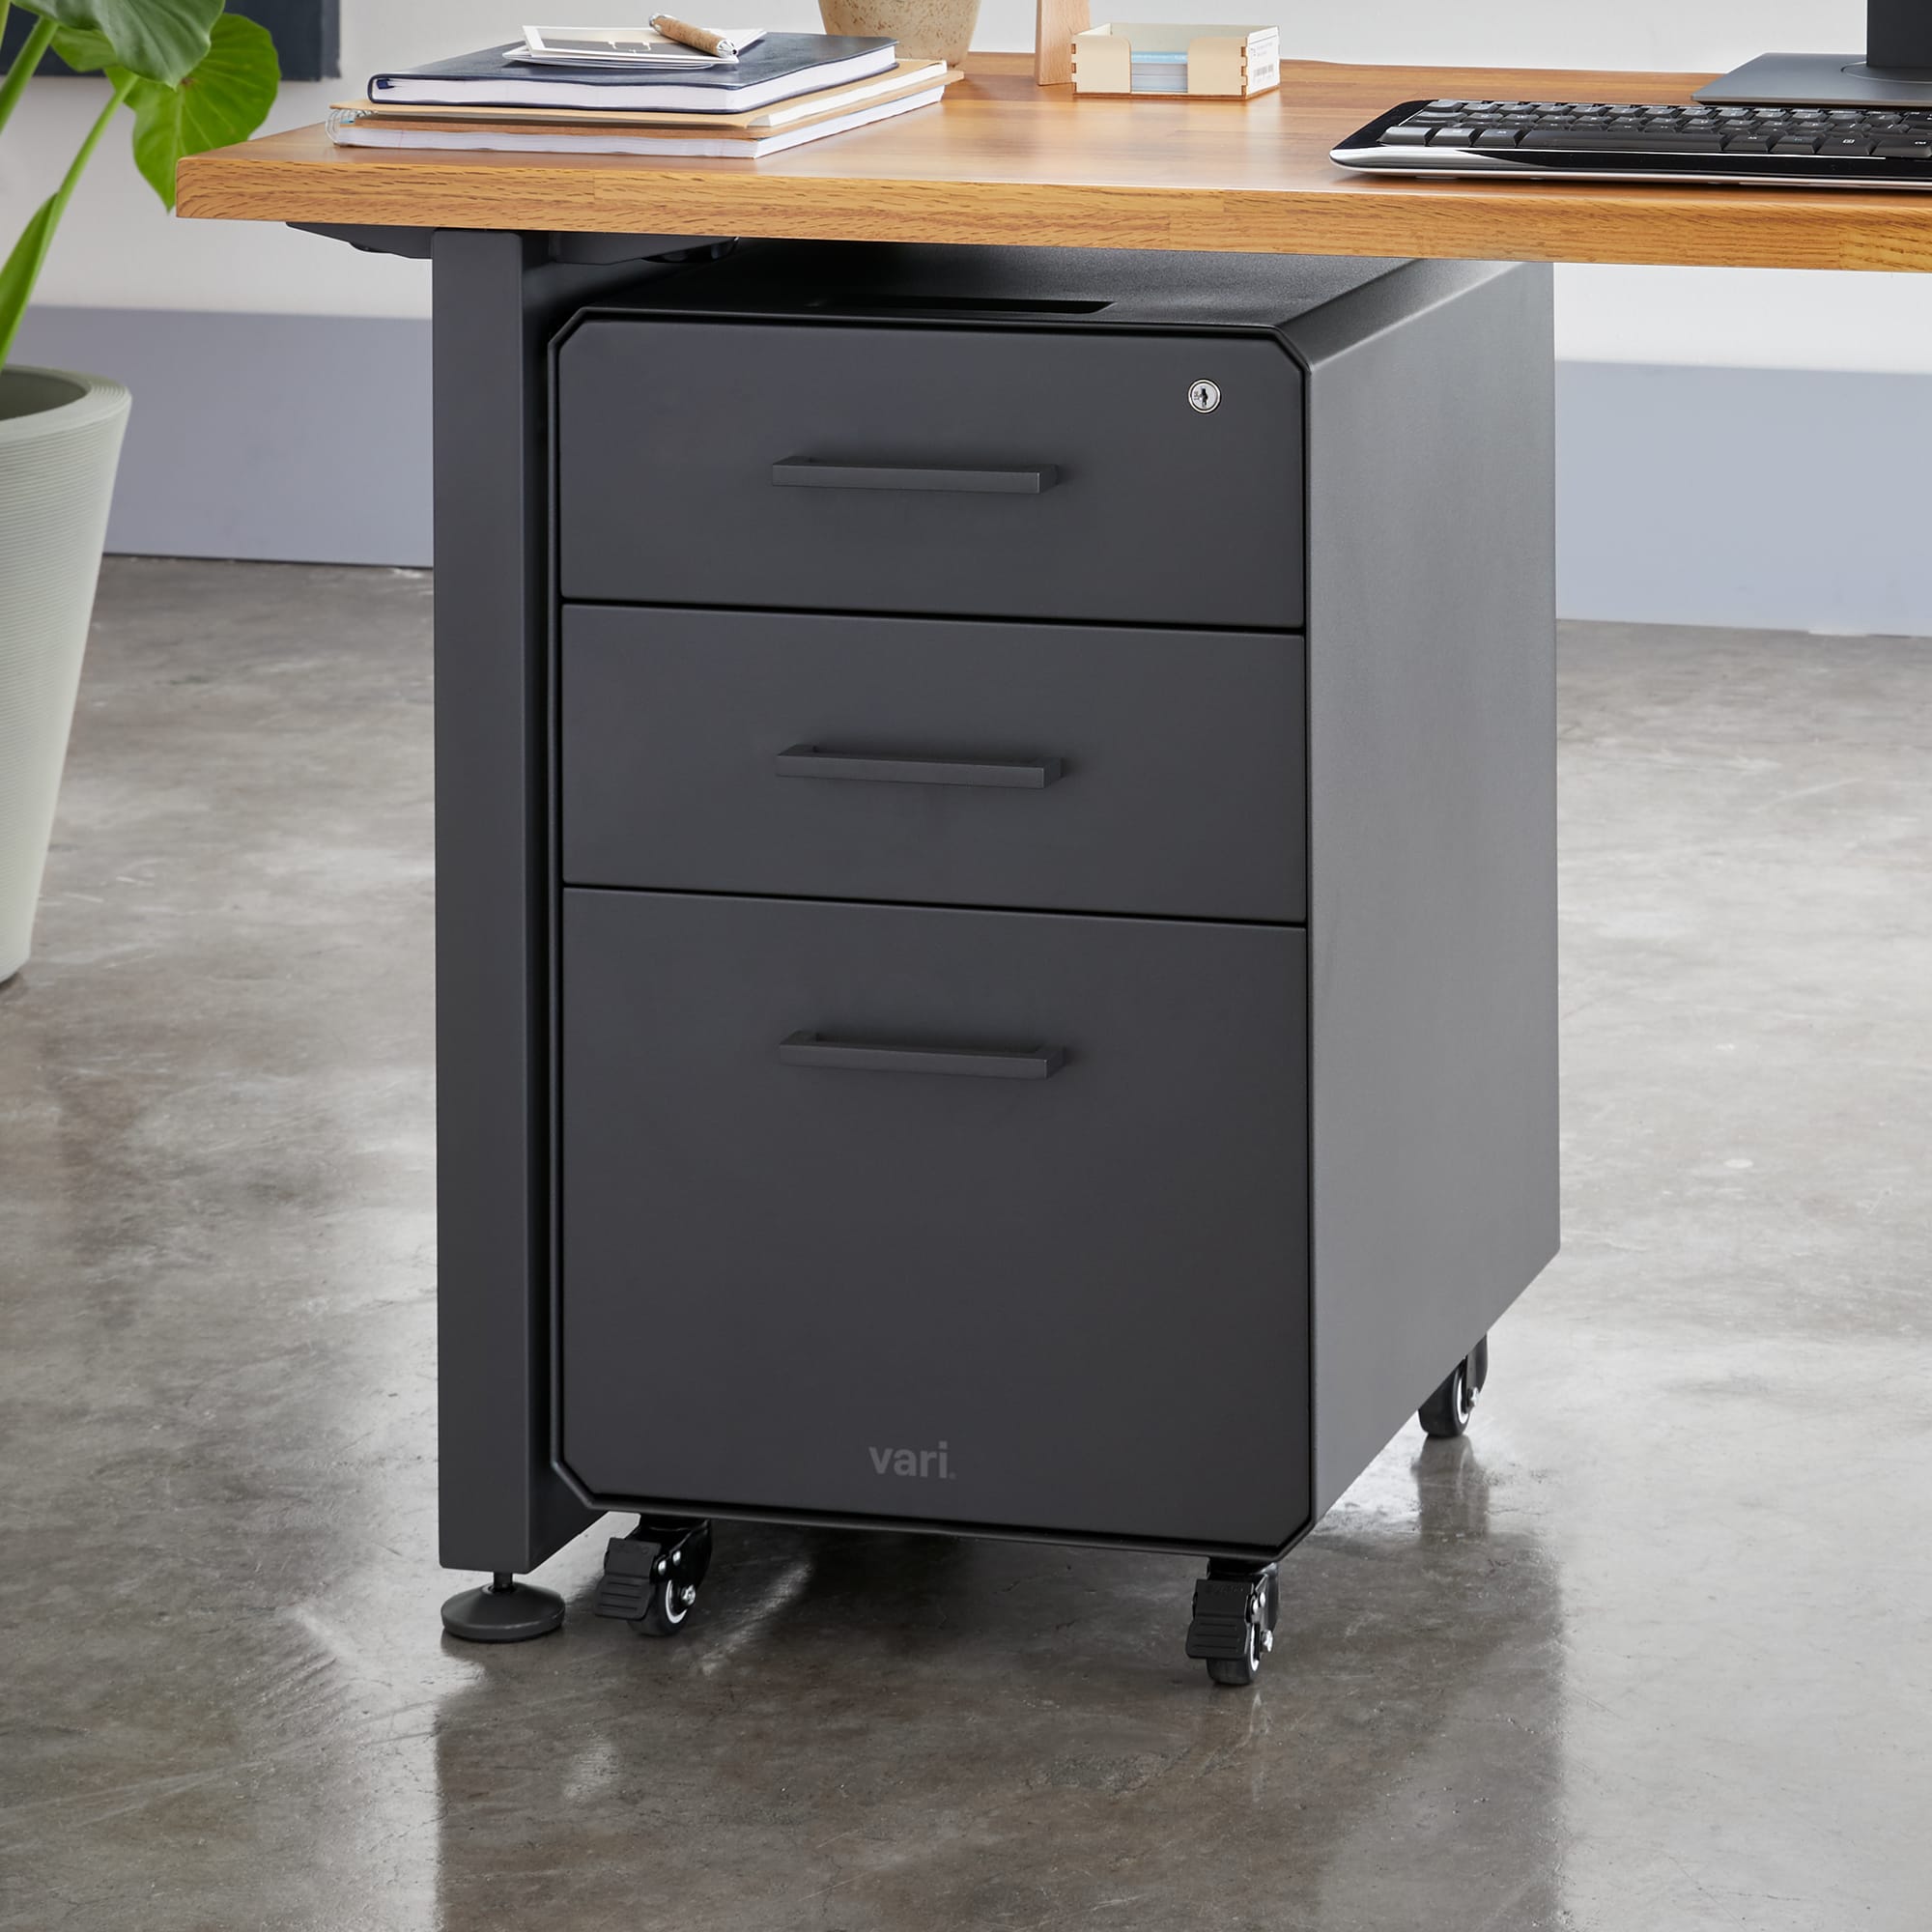 Storage Seat, Desk File Drawers and Seating